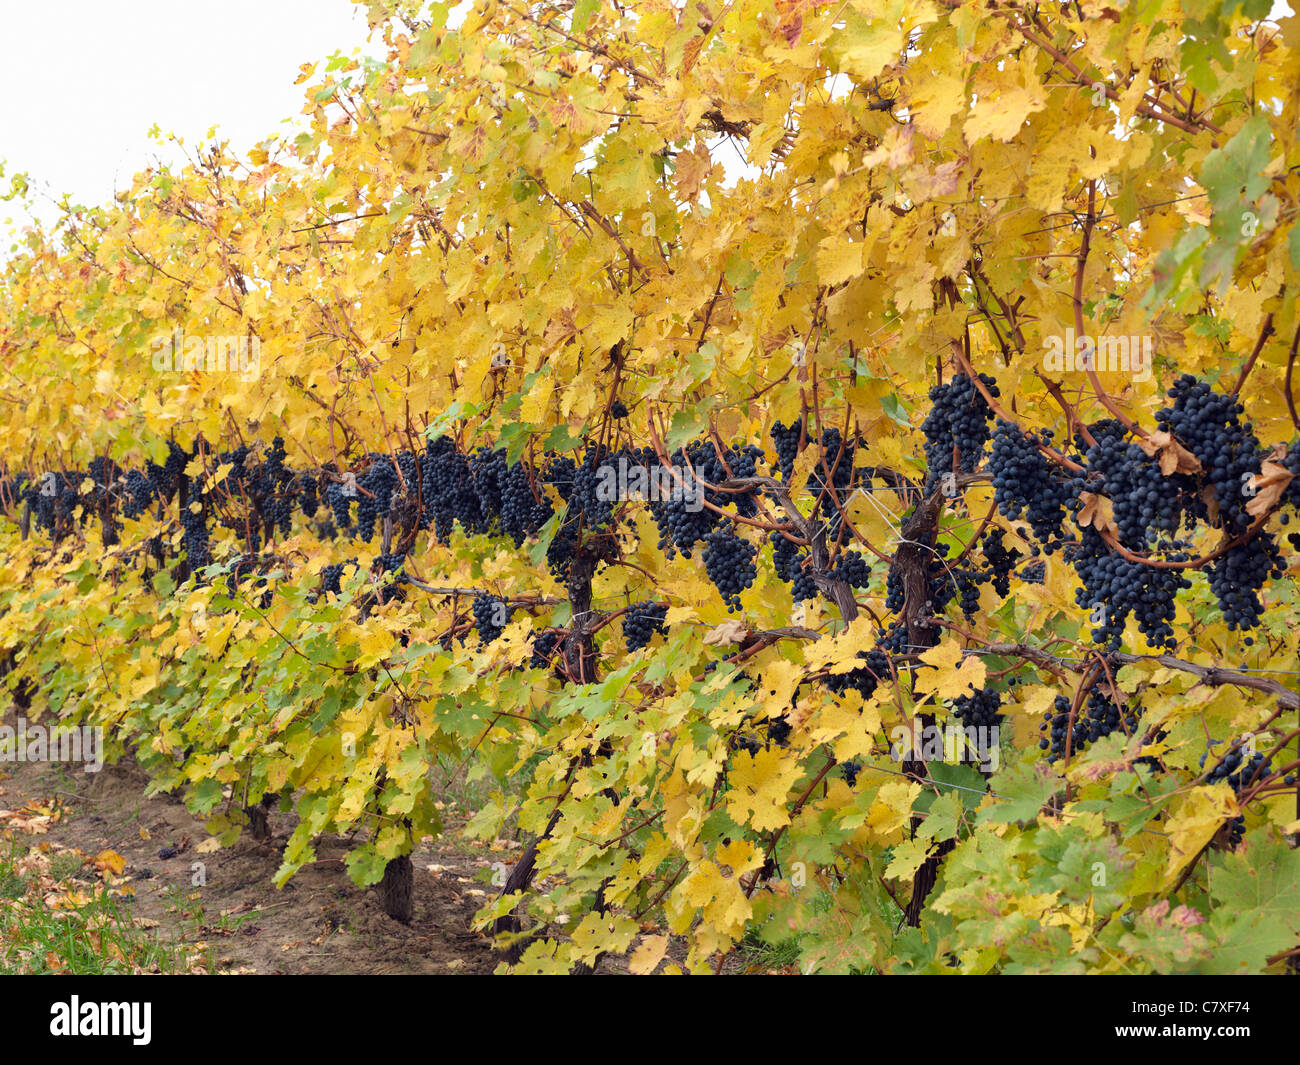 Canada,Ontario,Niagara-on-the-Lake, grapes on the vine ready for harvest in the autumn Stock Photo